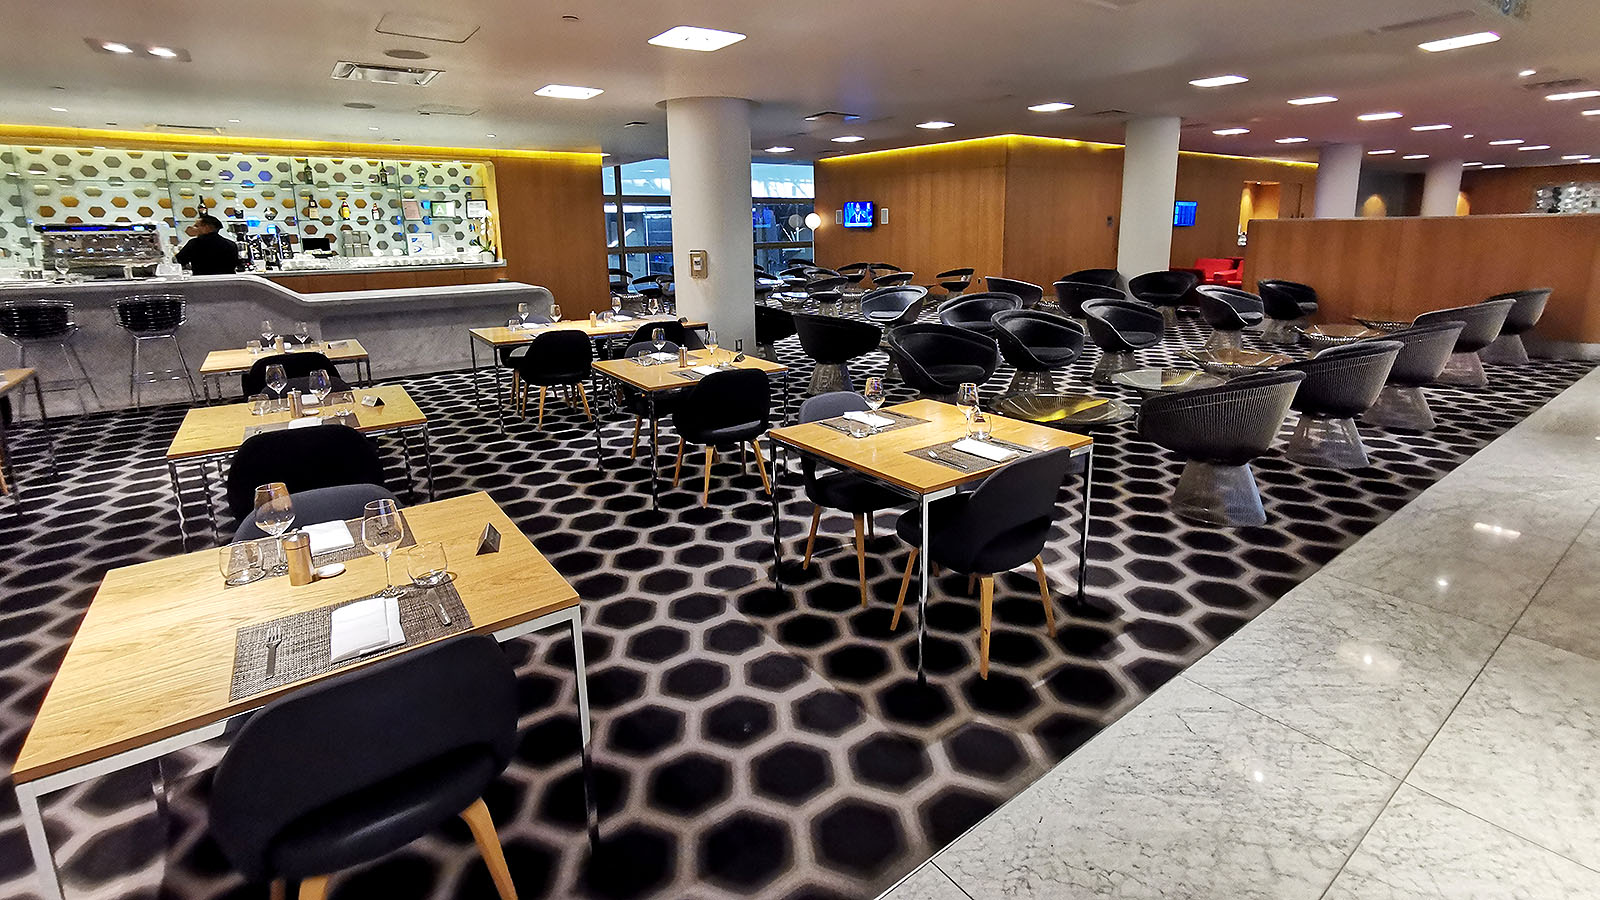 Tables and chairs in the Qantas LA First Lounge